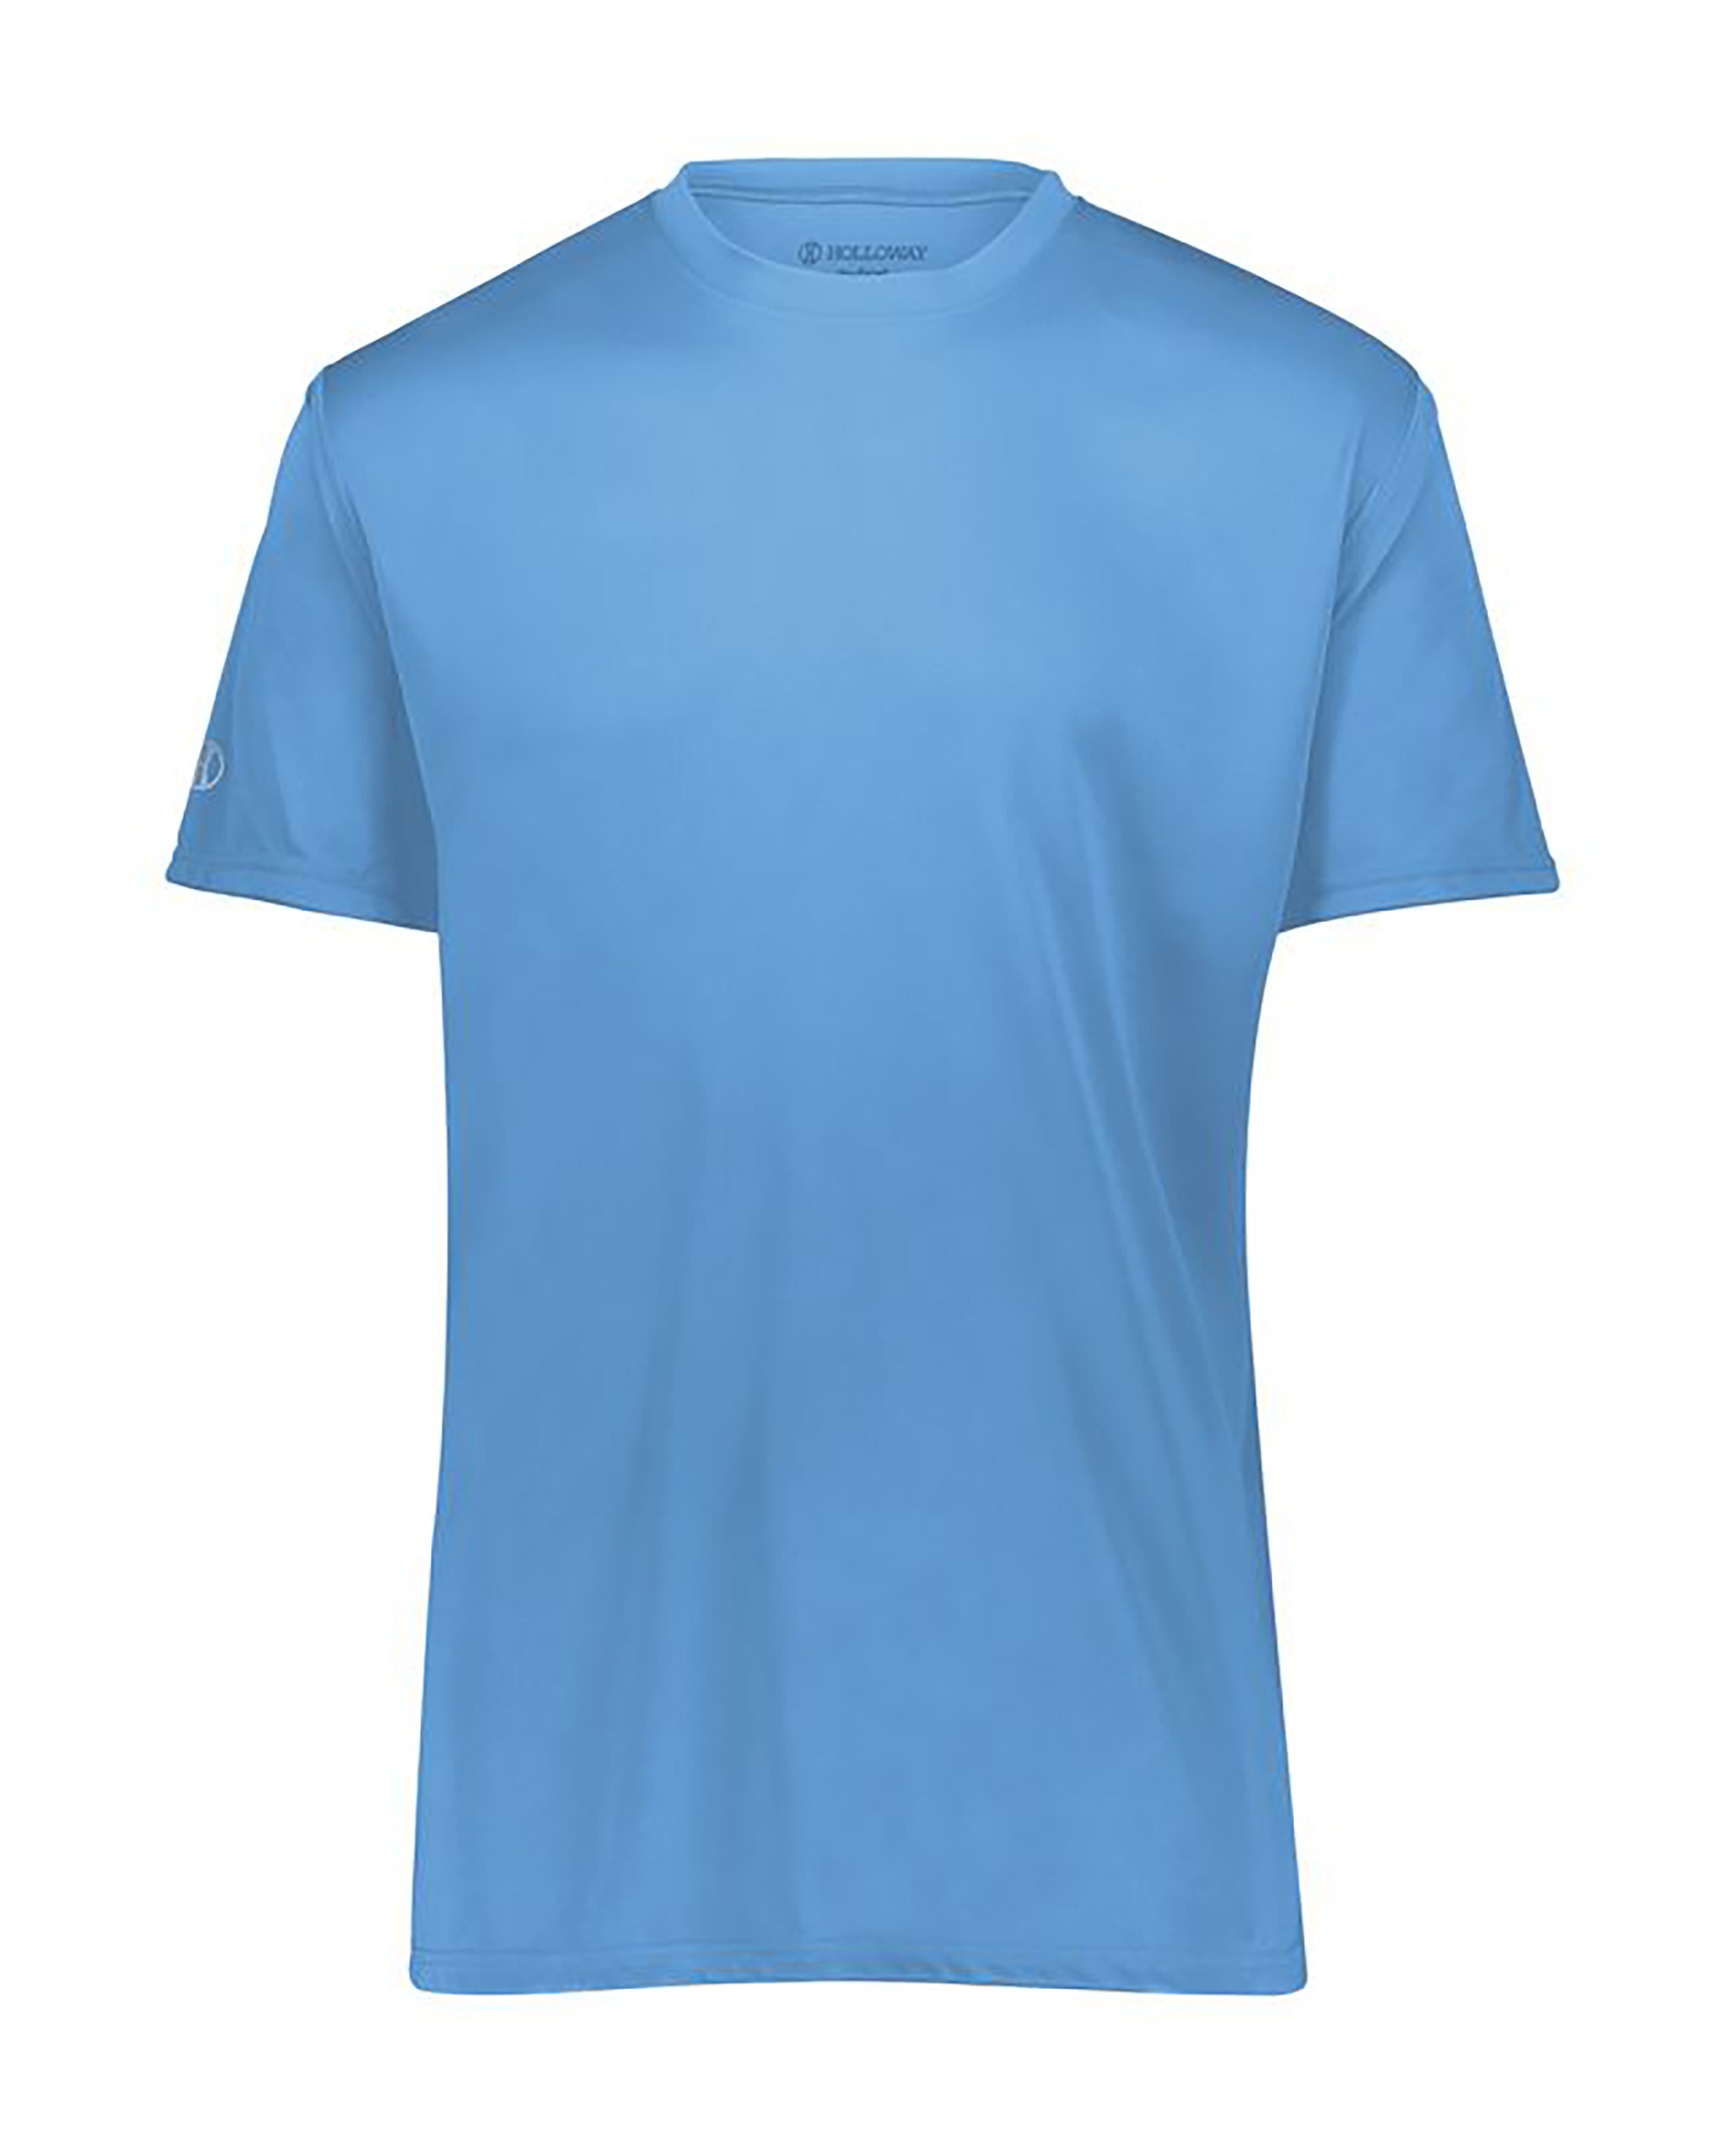 Holloway 222818 Momentum Tee, shown in Columbia Blue